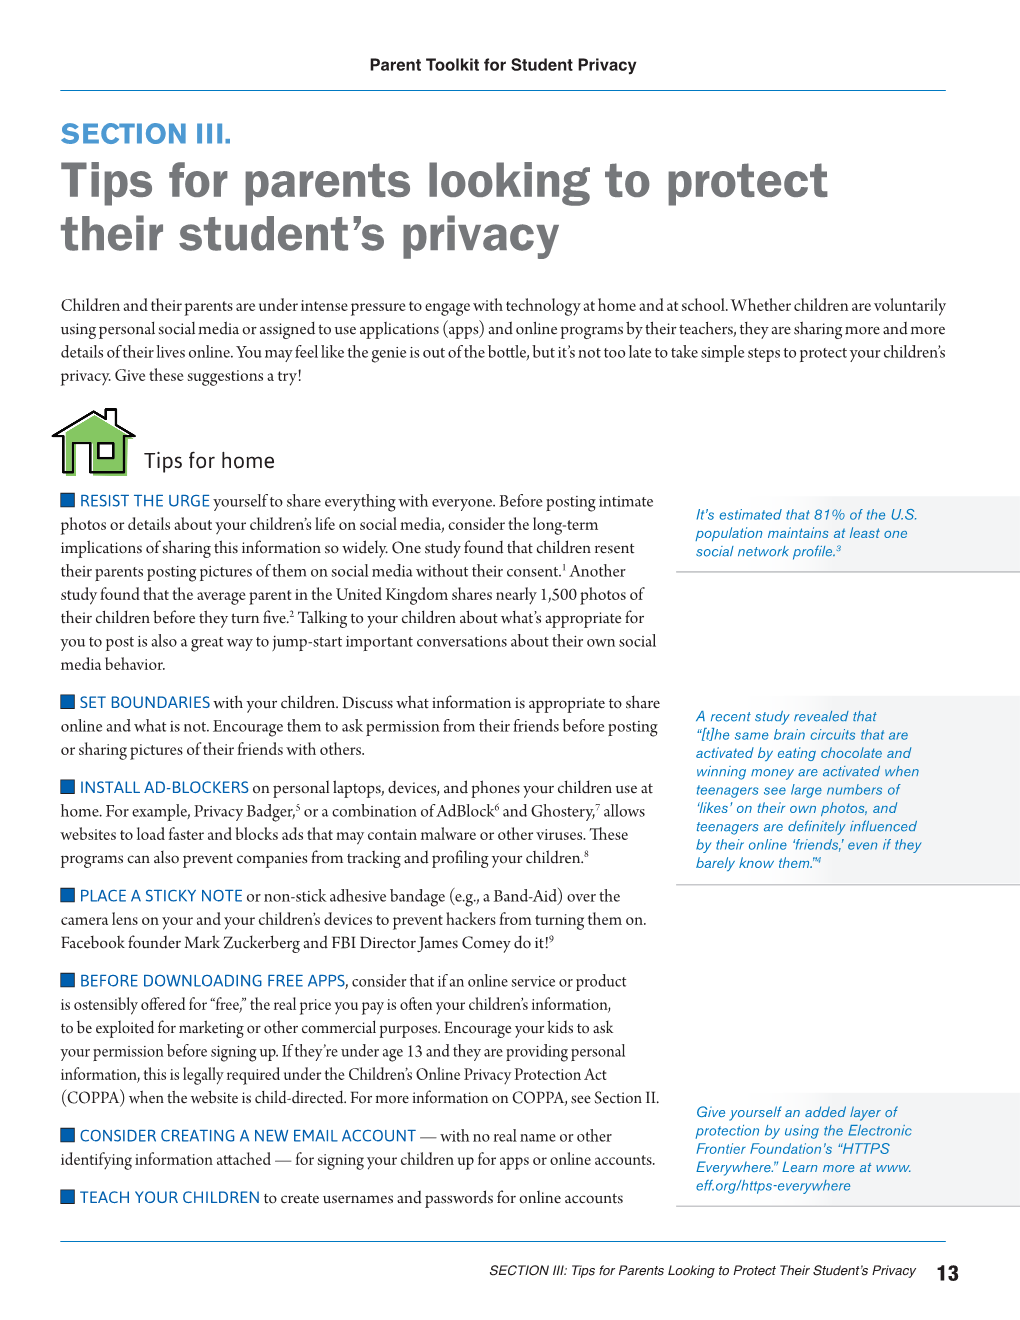 Tips for Parents Looking to Protect Their Student's Privacy